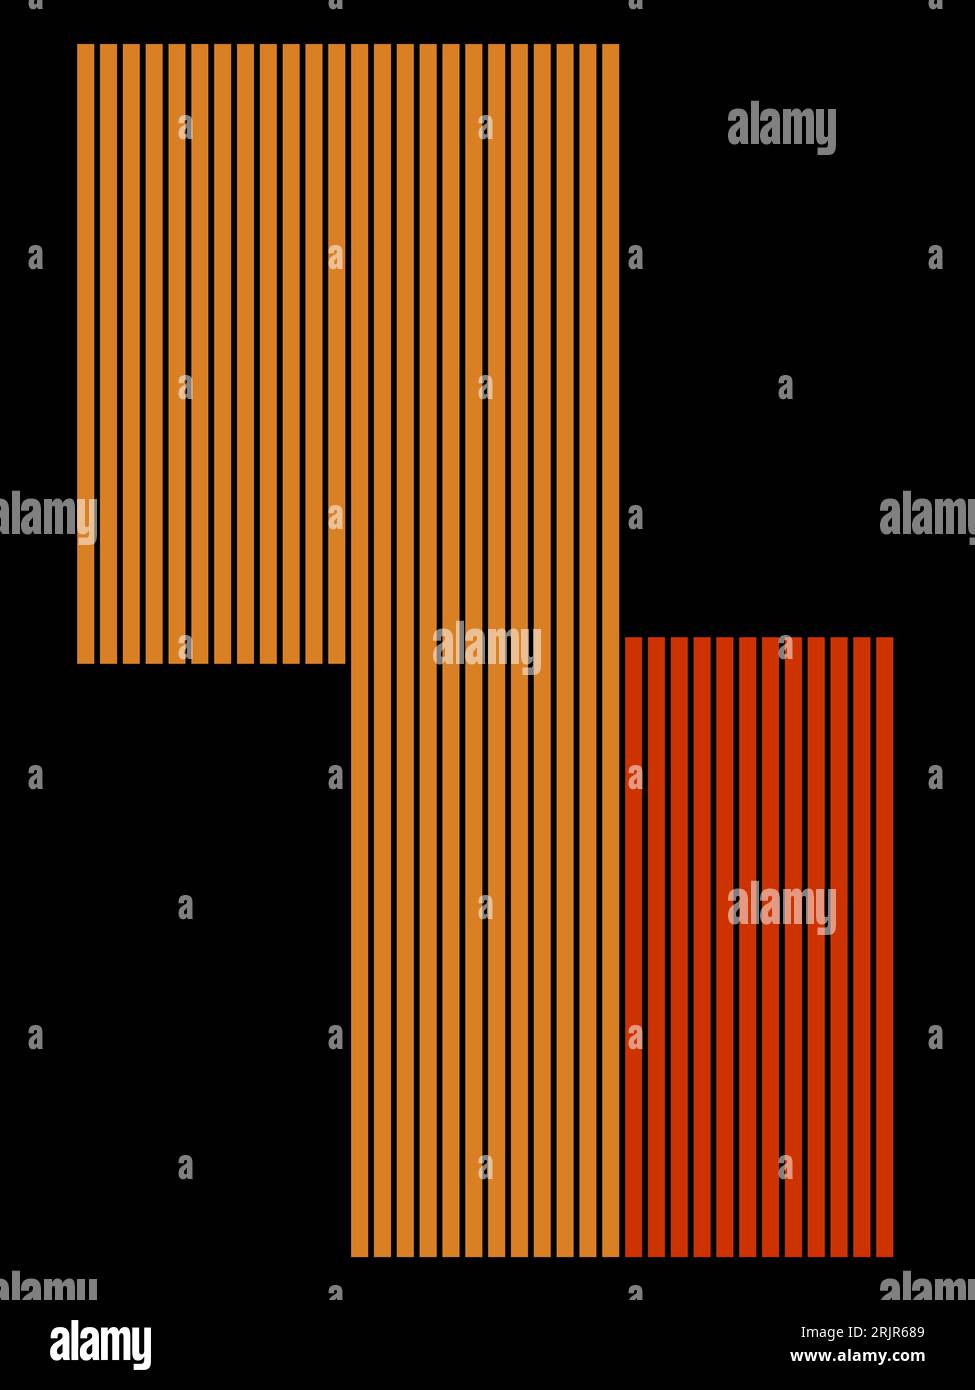 An illustration of a striped background in bright shades of orange and red on a black background Stock Photo